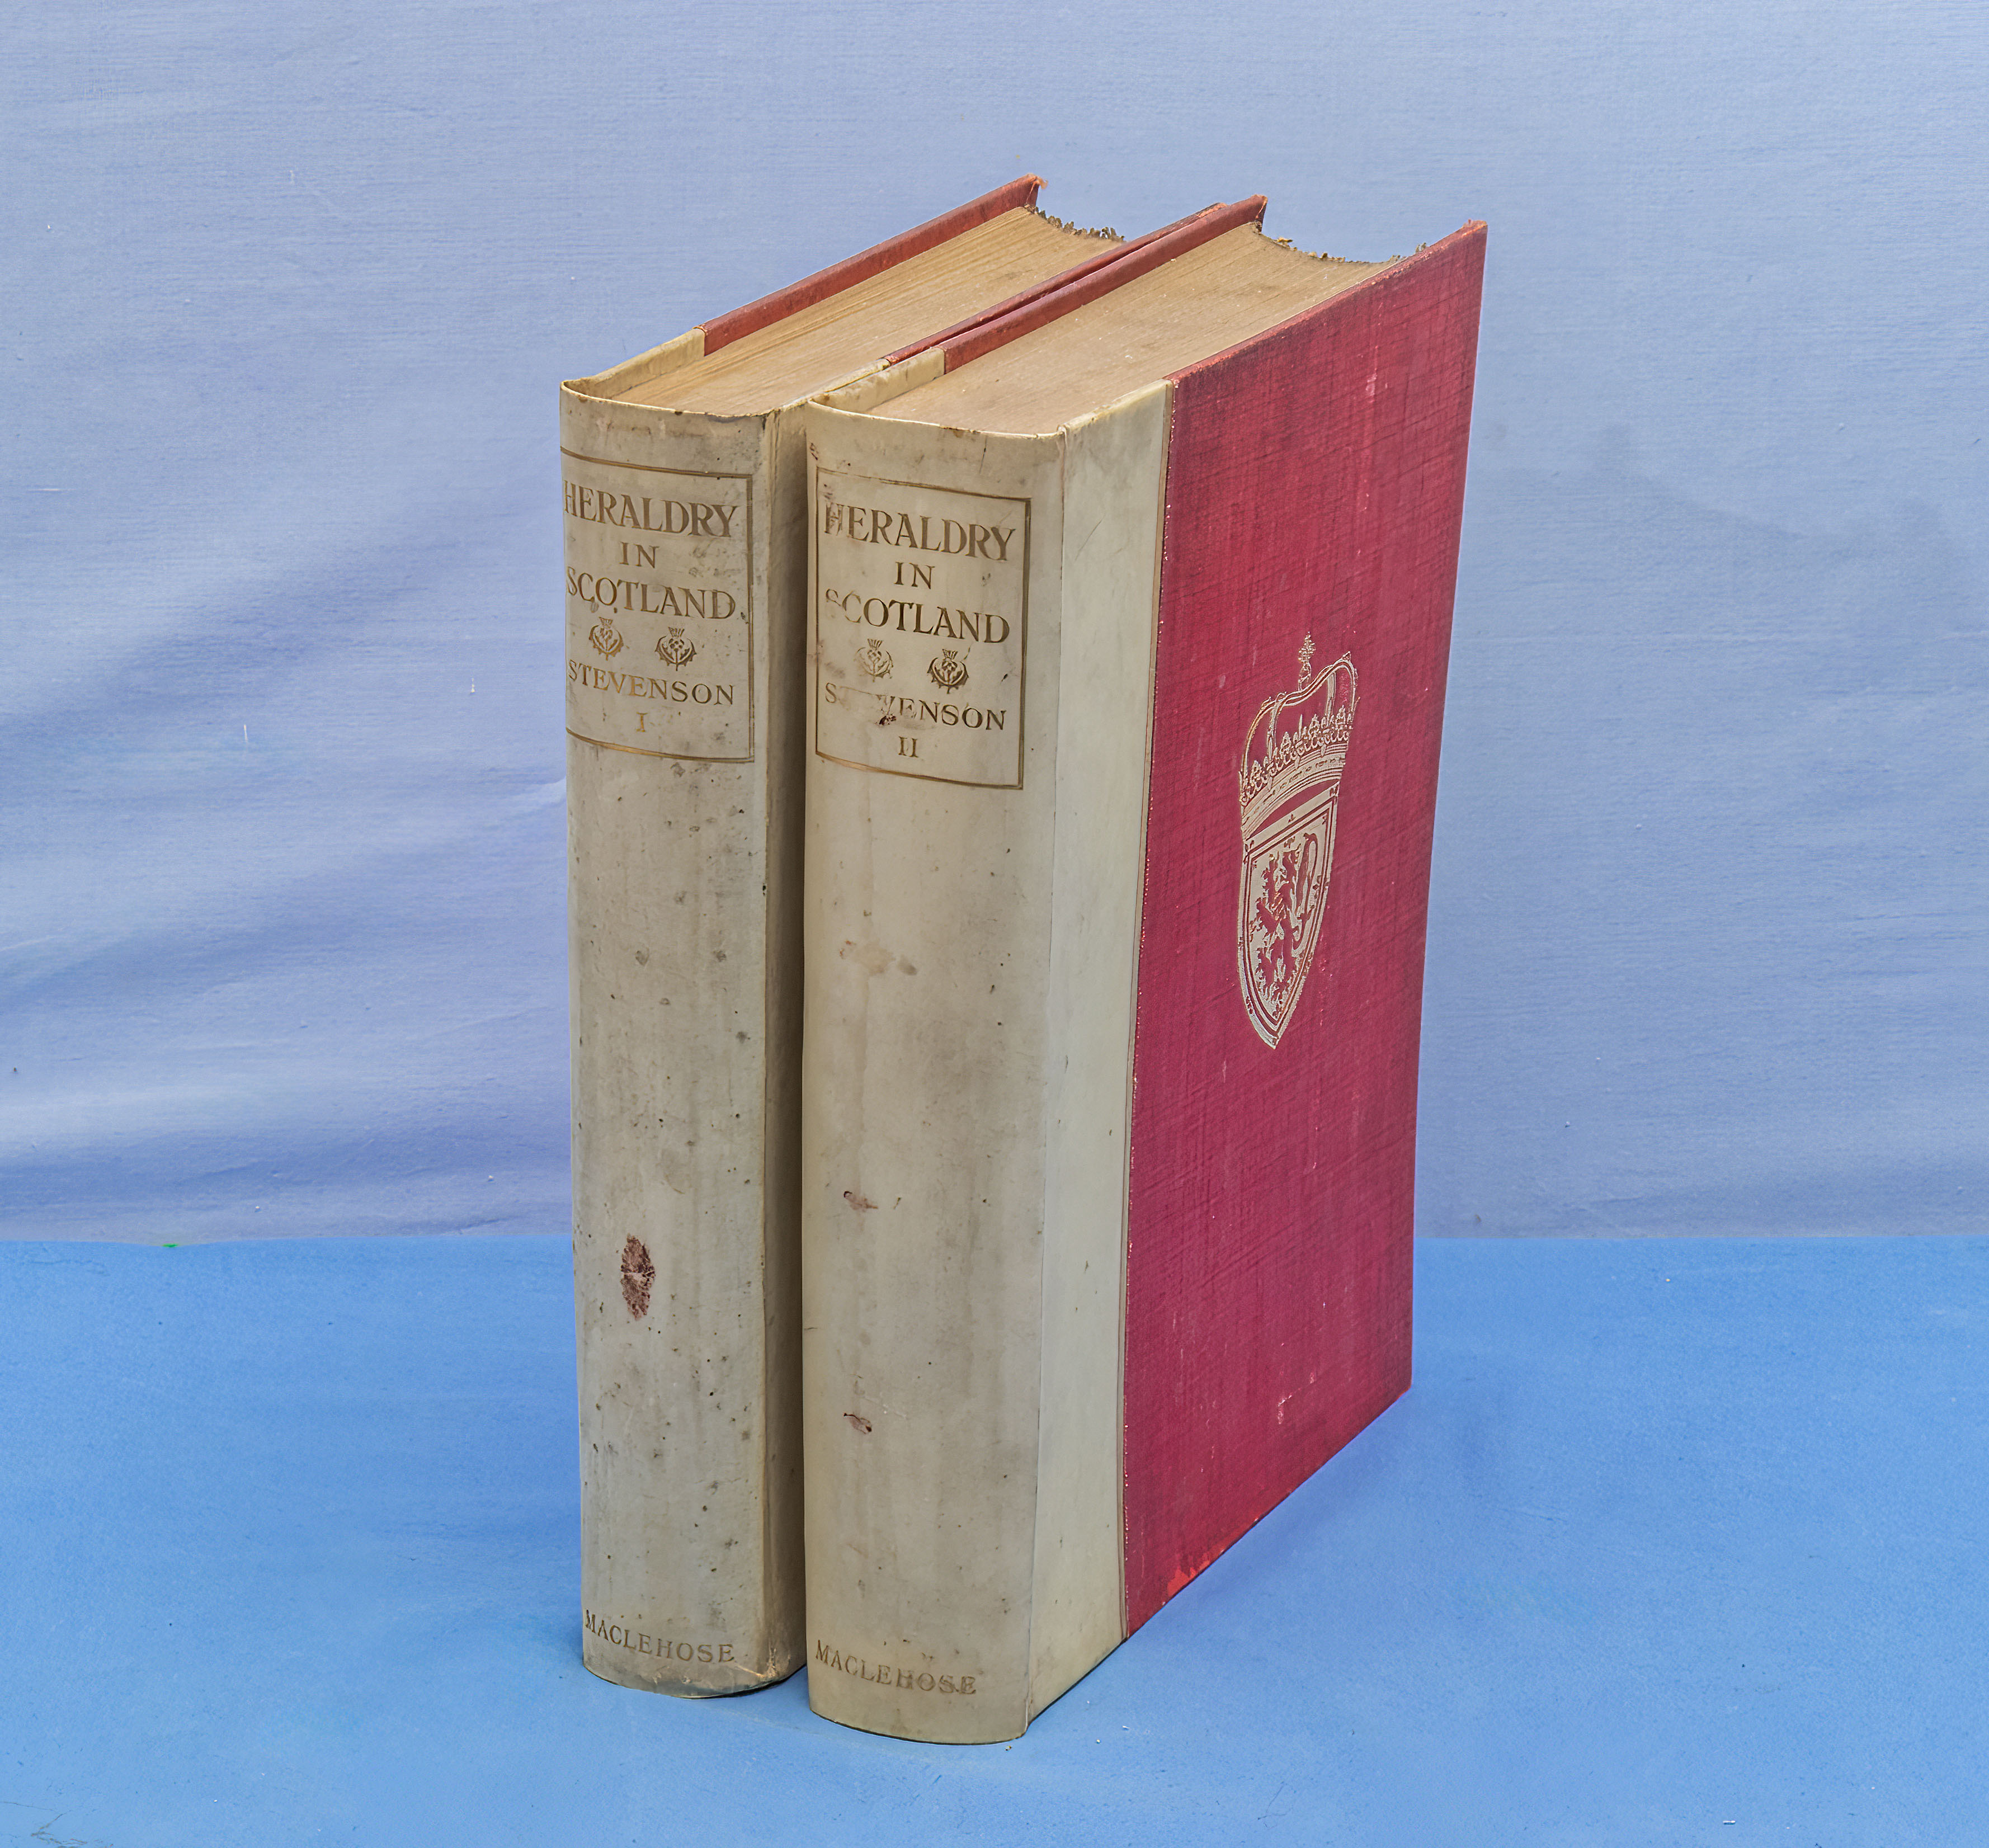 Heraldry in Scotland volumes I and II by J H Stevenson published by James Maclehose and Sons Glasgow